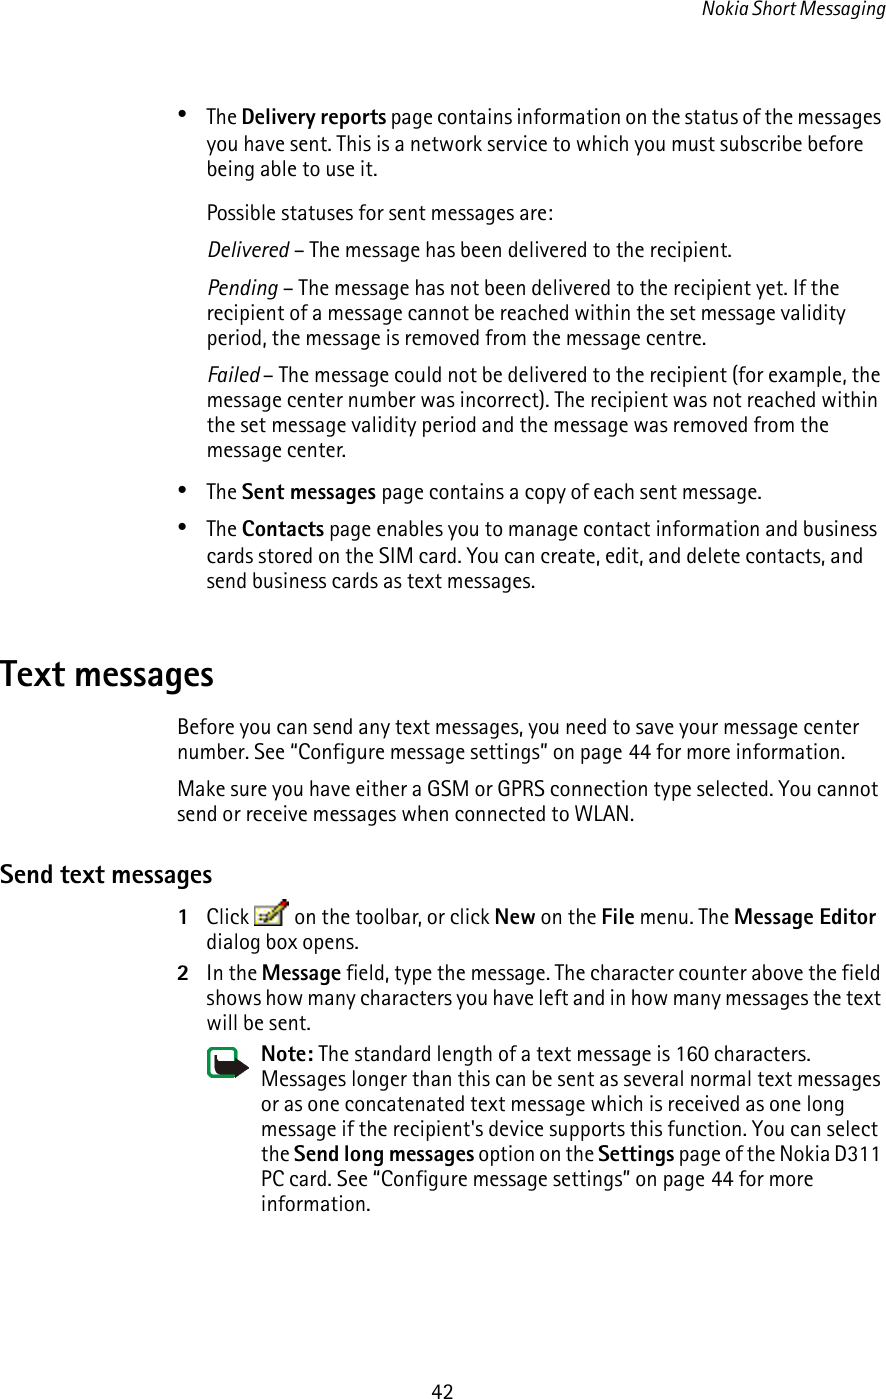 Nokia Short Messaging42•The Delivery reports page contains information on the status of the messages you have sent. This is a network service to which you must subscribe before being able to use it.Possible statuses for sent messages are:Delivered – The message has been delivered to the recipient.Pending – The message has not been delivered to the recipient yet. If the recipient of a message cannot be reached within the set message validity period, the message is removed from the message centre.Failed – The message could not be delivered to the recipient (for example, the message center number was incorrect). The recipient was not reached within the set message validity period and the message was removed from the message center.•The Sent messages page contains a copy of each sent message.•The Contacts page enables you to manage contact information and business cards stored on the SIM card. You can create, edit, and delete contacts, and send business cards as text messages.Text messagesBefore you can send any text messages, you need to save your message center number. See “Configure message settings” on page 44 for more information.Make sure you have either a GSM or GPRS connection type selected. You cannot send or receive messages when connected to WLAN.Send text messages1Click   on the toolbar, or click New on the File menu. The Message Editor dialog box opens.2In the Message field, type the message. The character counter above the field shows how many characters you have left and in how many messages the text will be sent. Note: The standard length of a text message is 160 characters. Messages longer than this can be sent as several normal text messages or as one concatenated text message which is received as one long message if the recipient&apos;s device supports this function. You can select the Send long messages option on the Settings page of the Nokia D311 PC card. See “Configure message settings” on page 44 for more information.